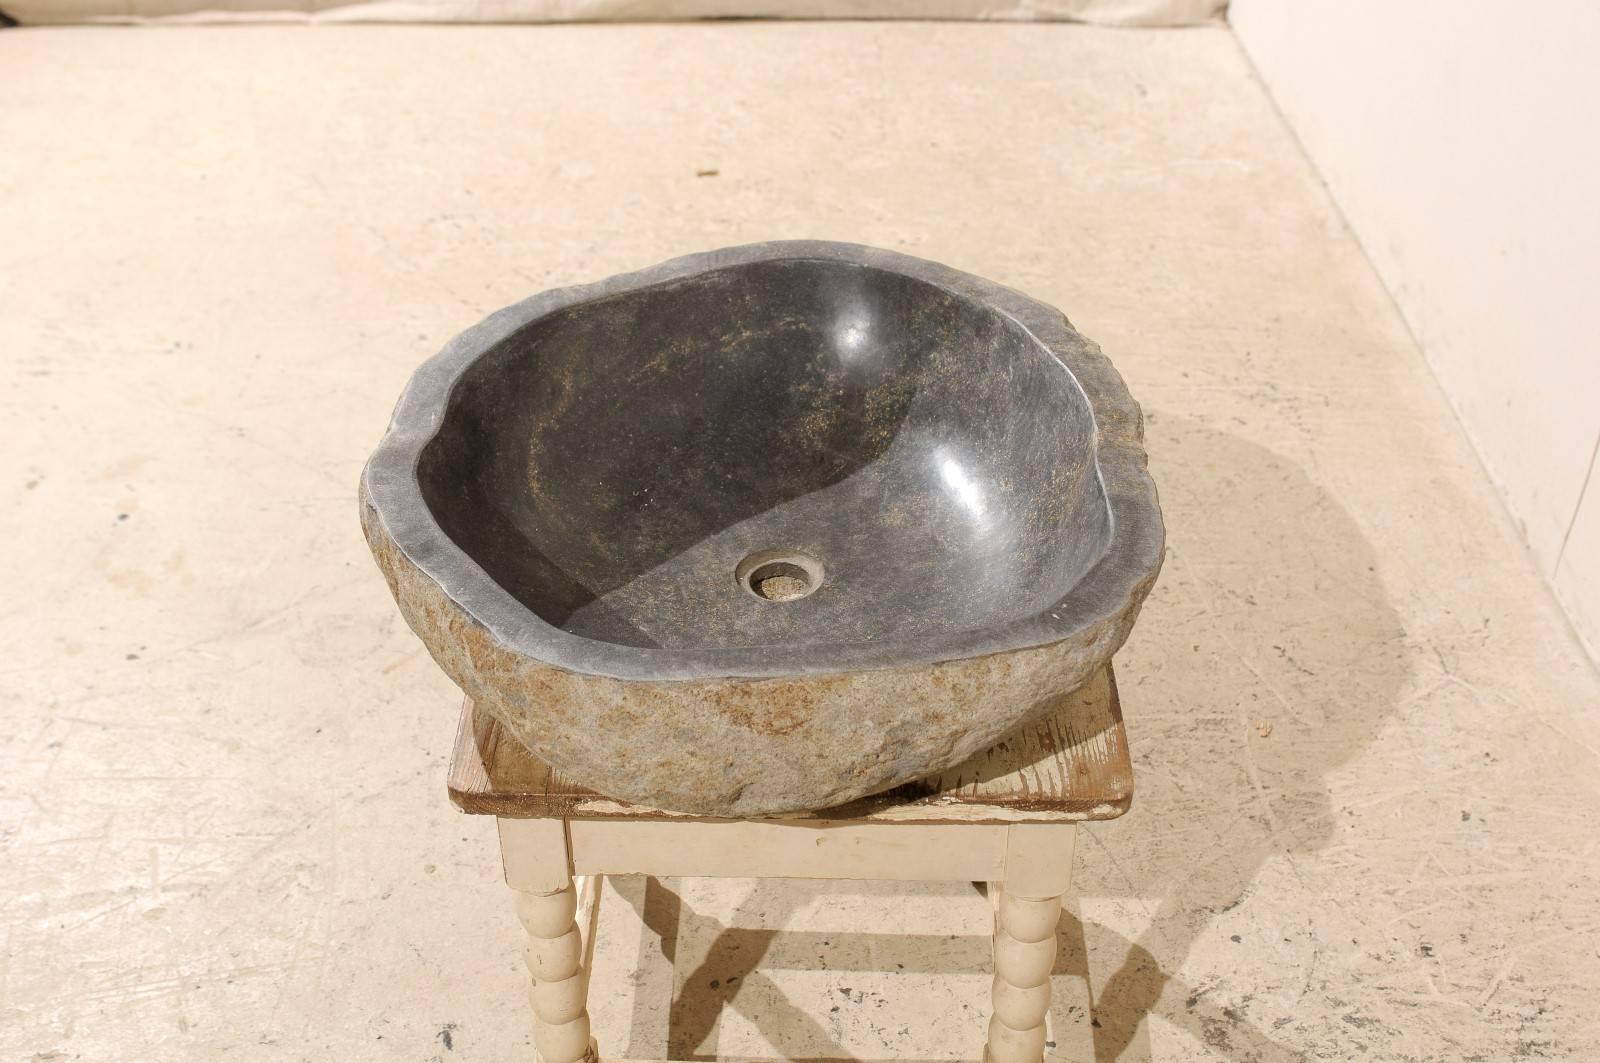 20th Century Sink Made from a River Rock / Boulder with Polished Black Interior, Tan Exterior